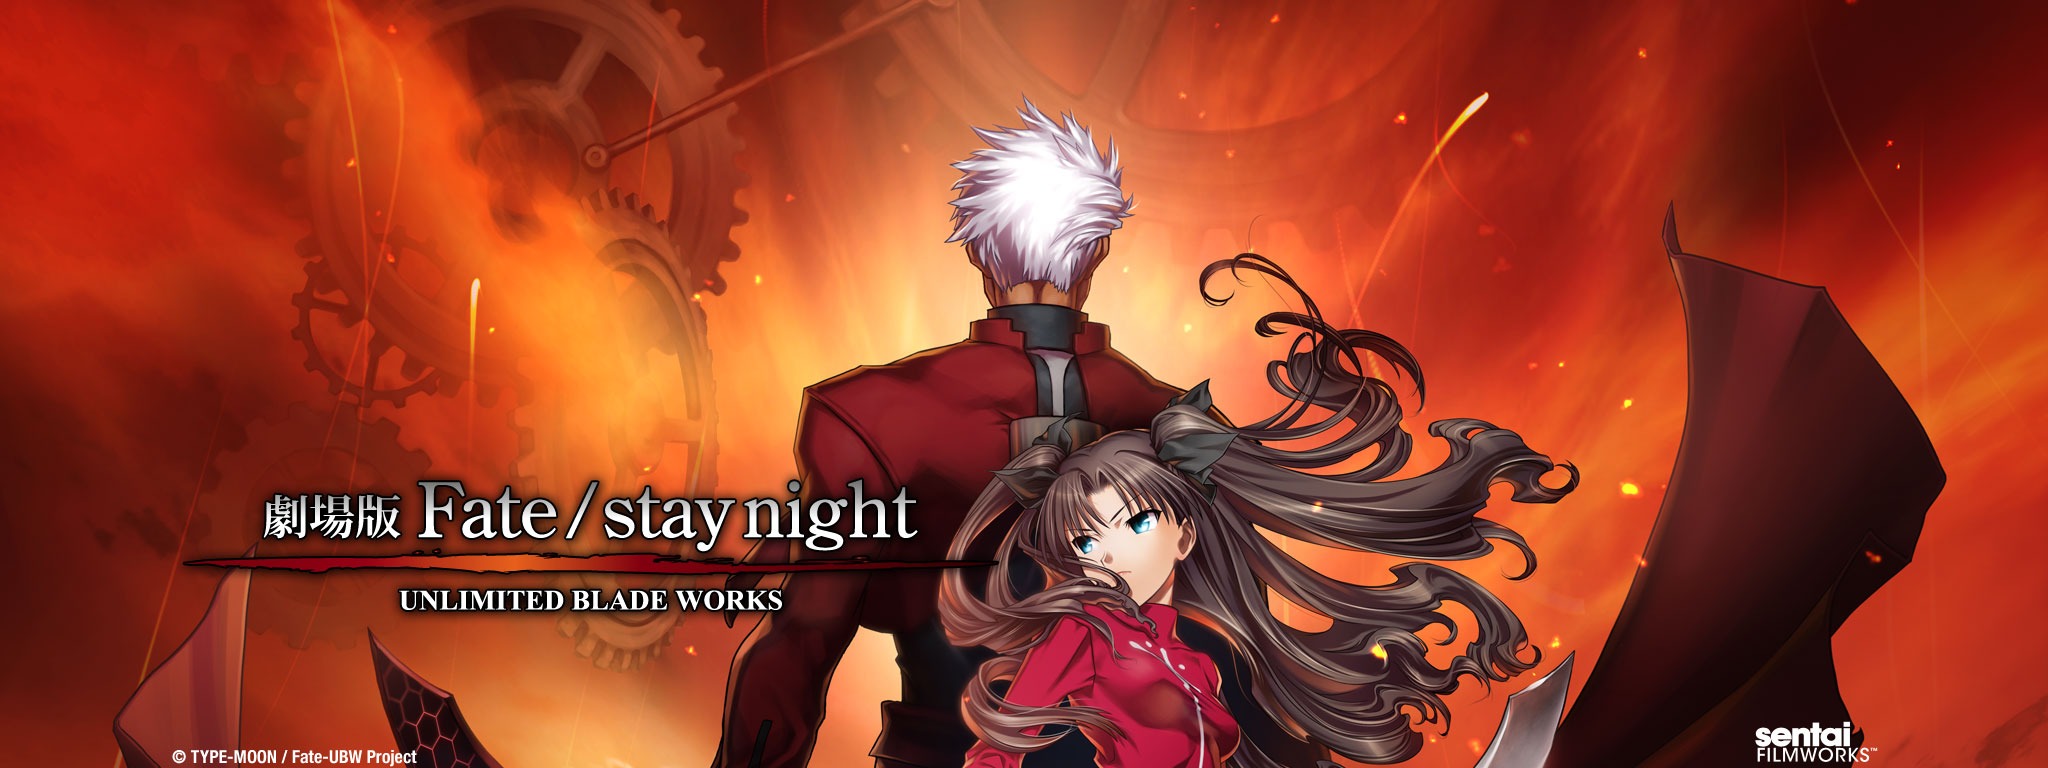 Title Art for Fate/Stay Night Unlimited Blade Works